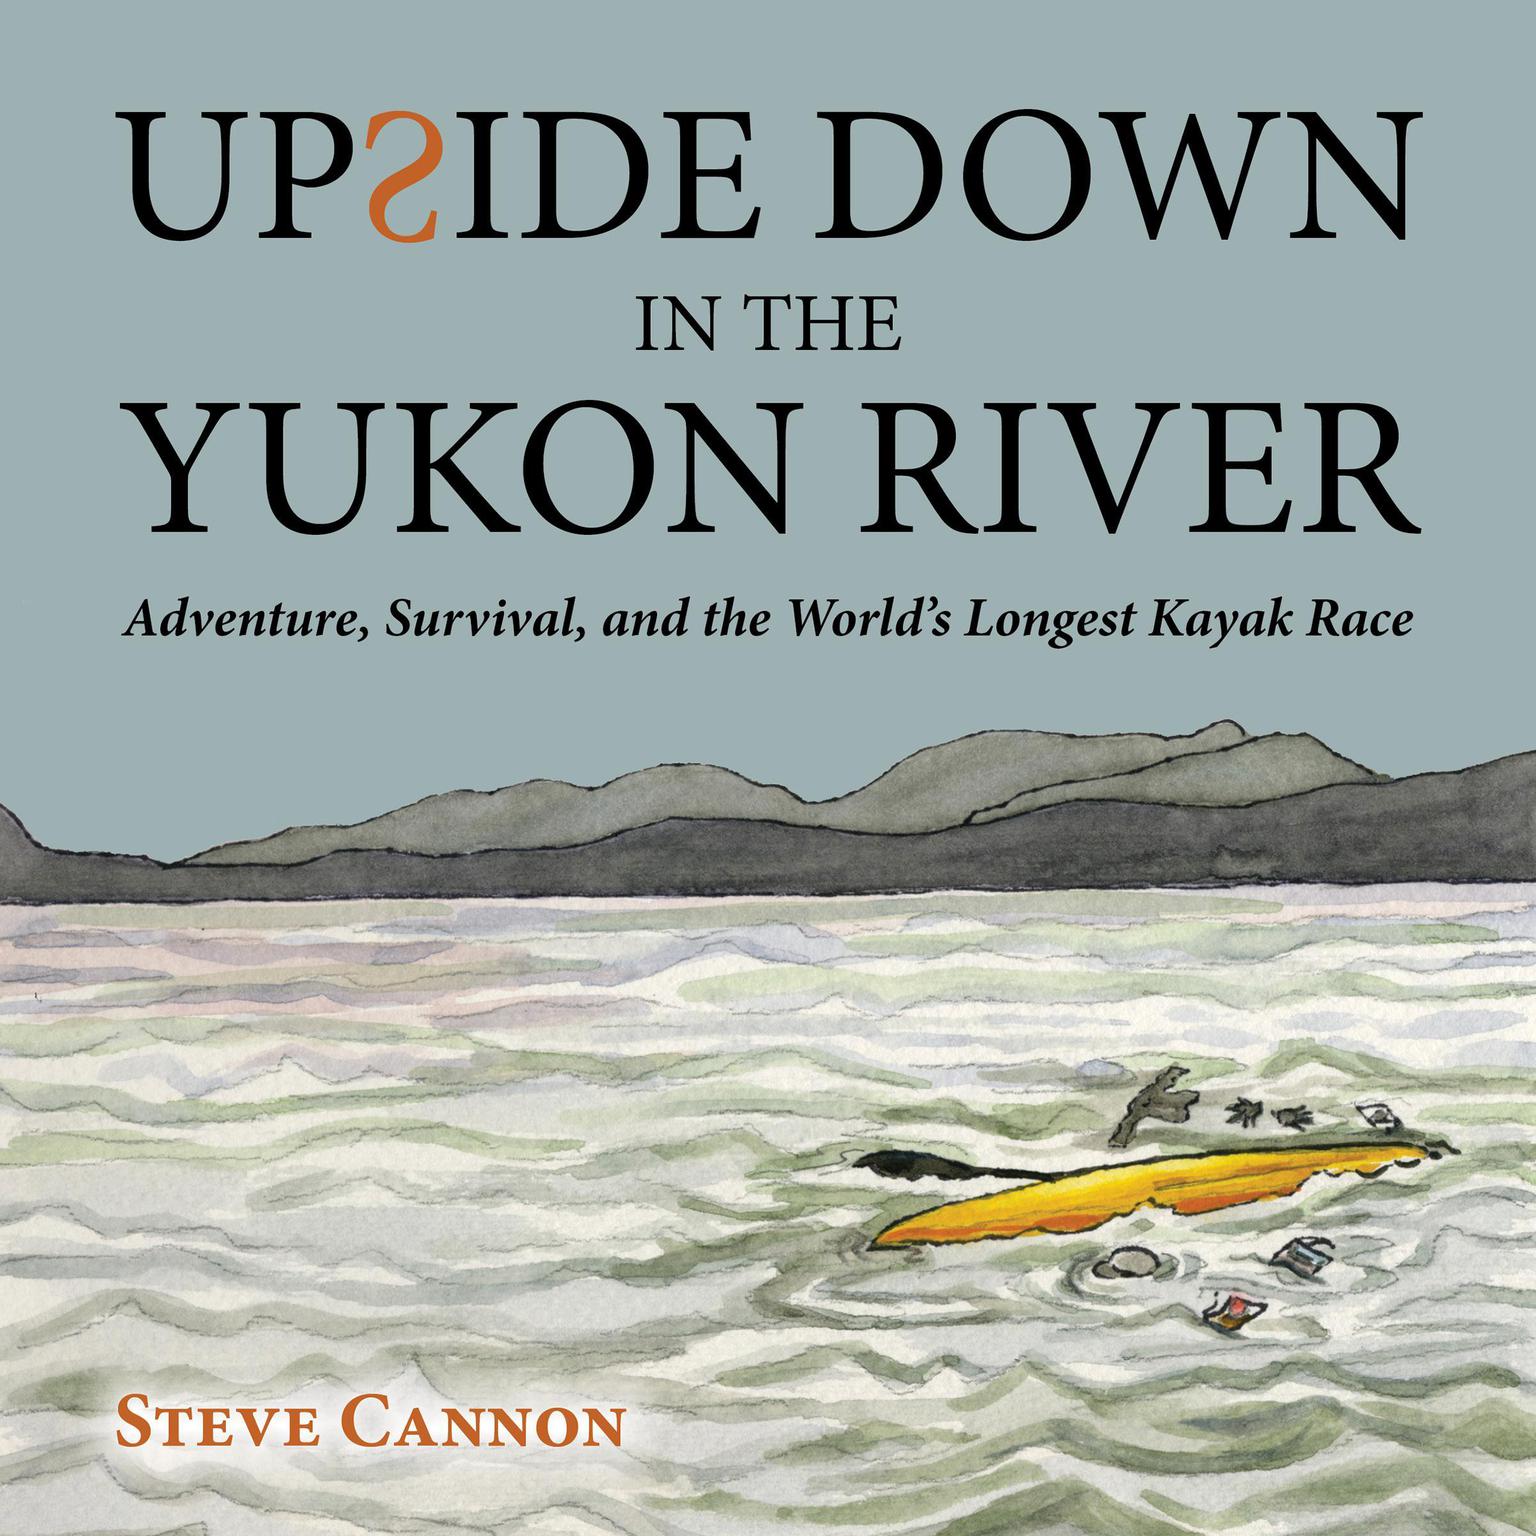 Upside Down in the Yukon River: Adventure, Survival, and the World’s Longest Kayak Race Audiobook, by Steve Cannon